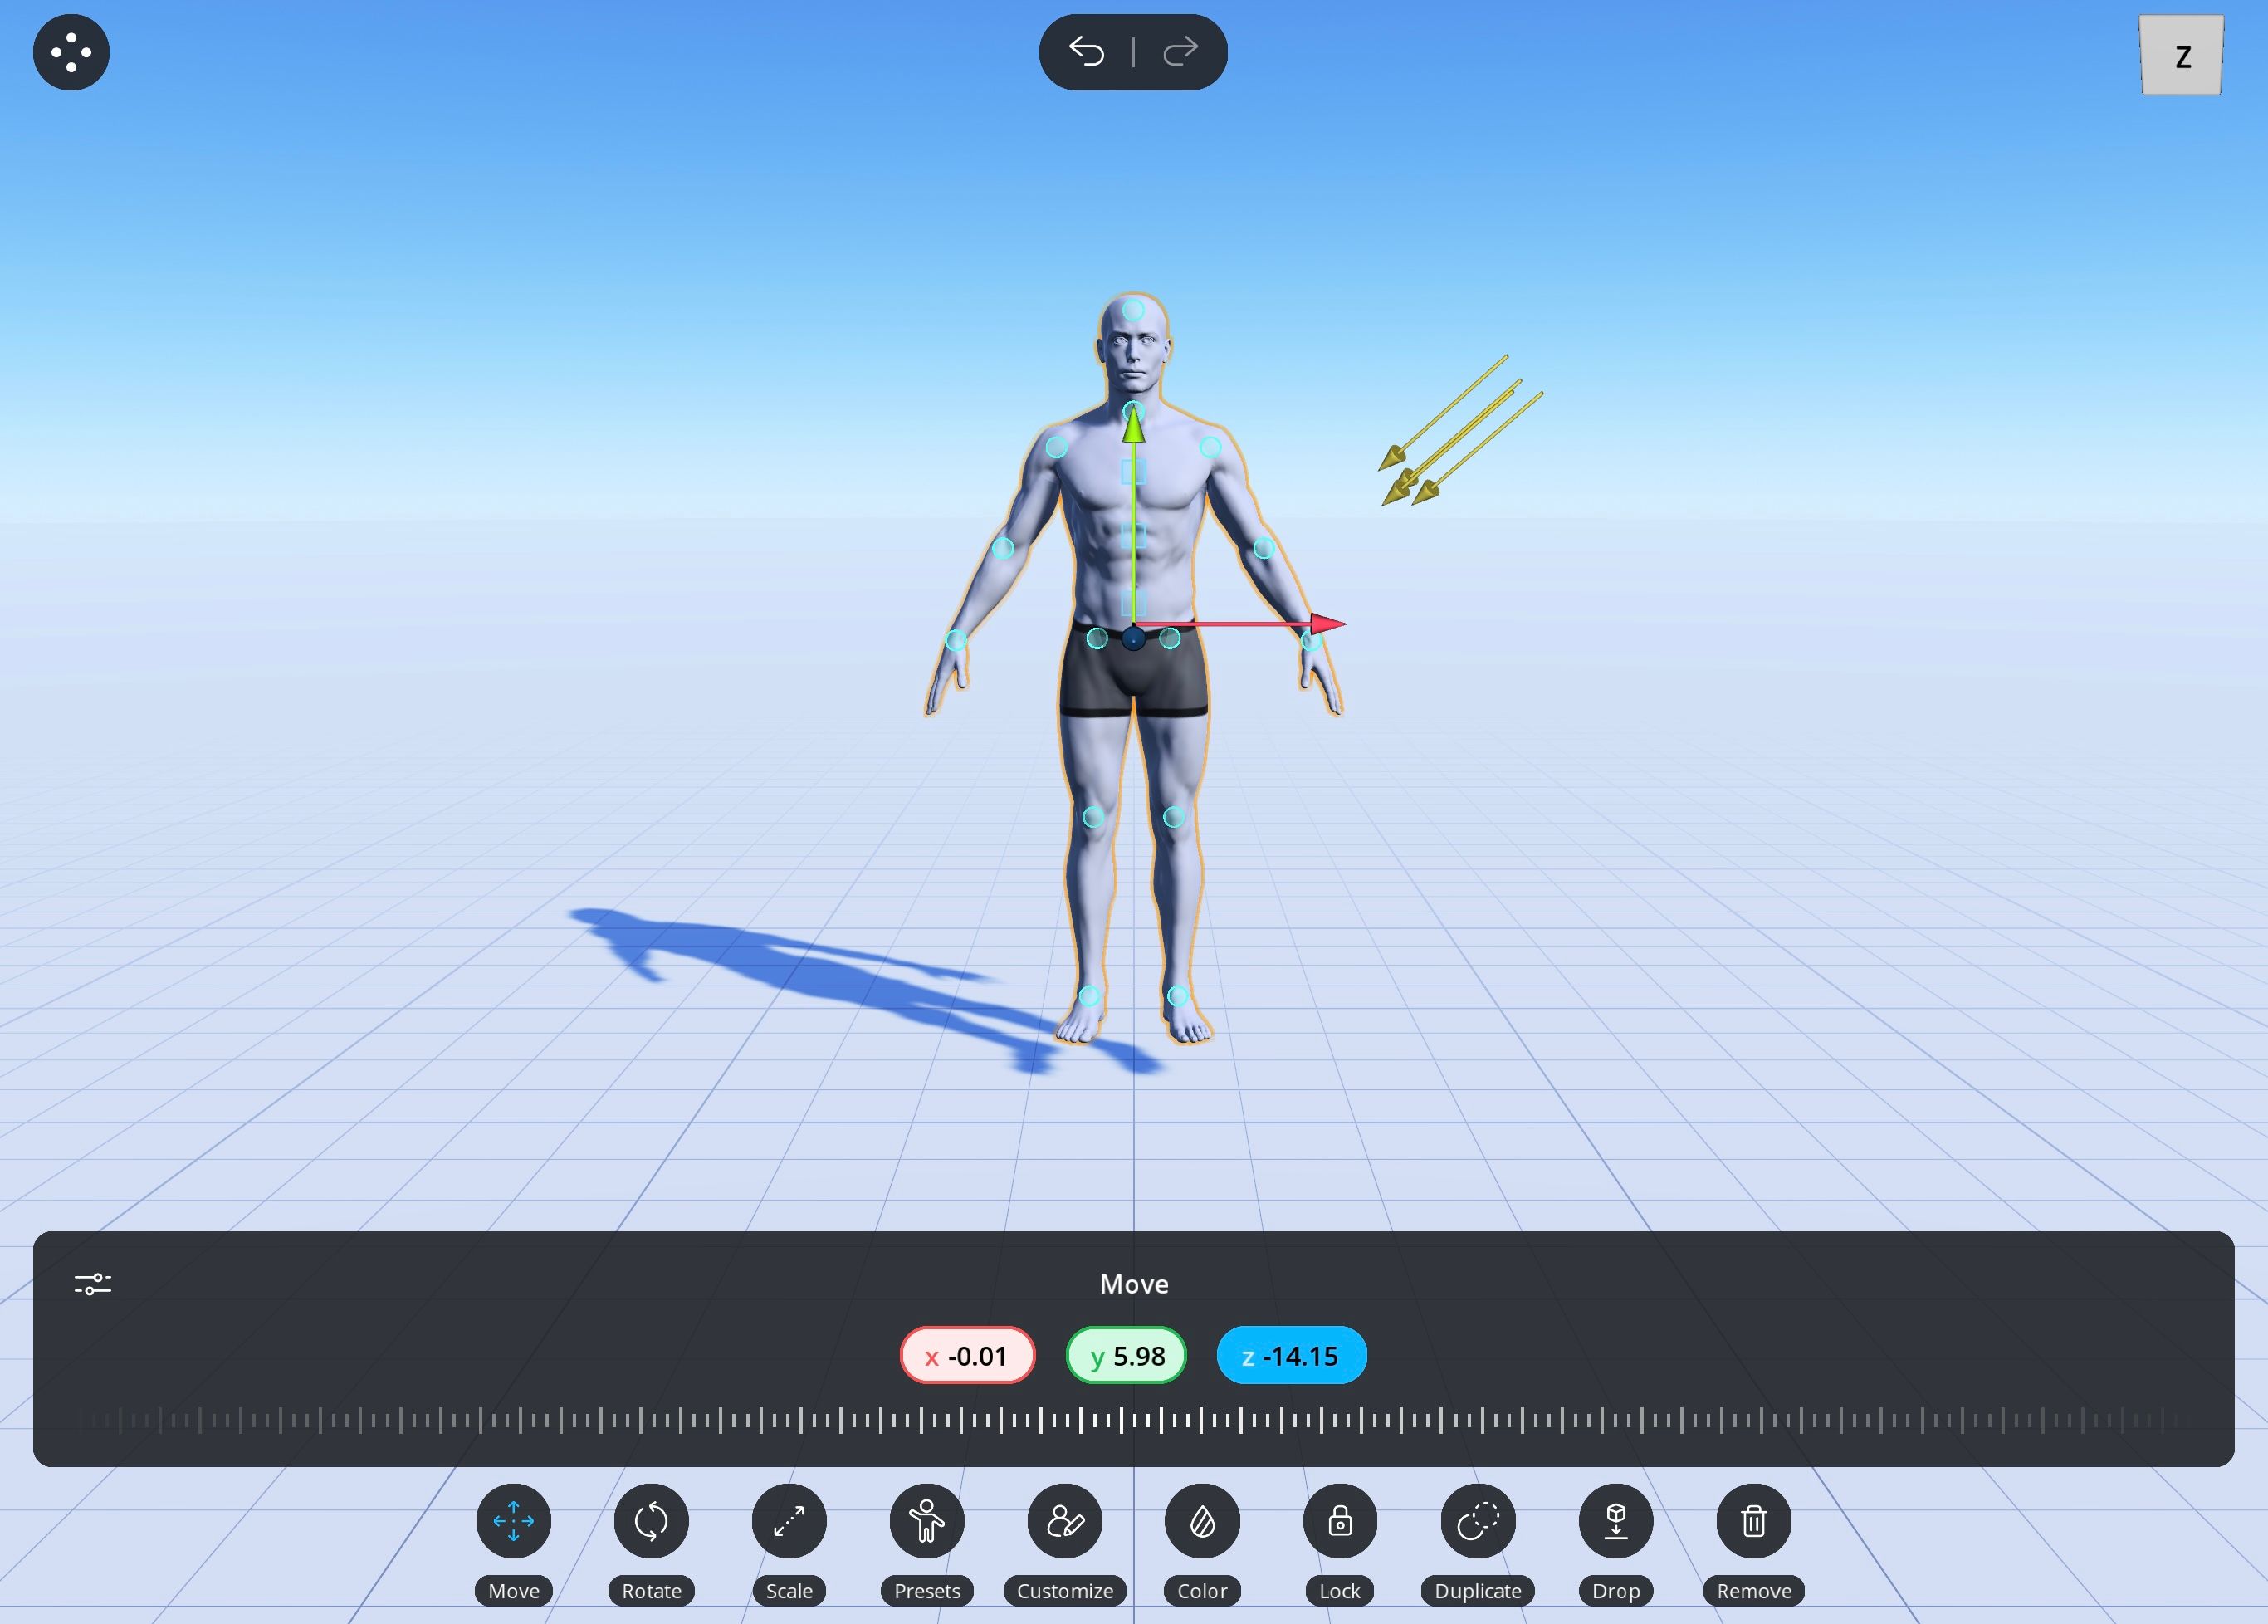 How to make a pose detection screen ❓ · Issue #1810 ·  mrousavy/react-native-vision-camera · GitHub